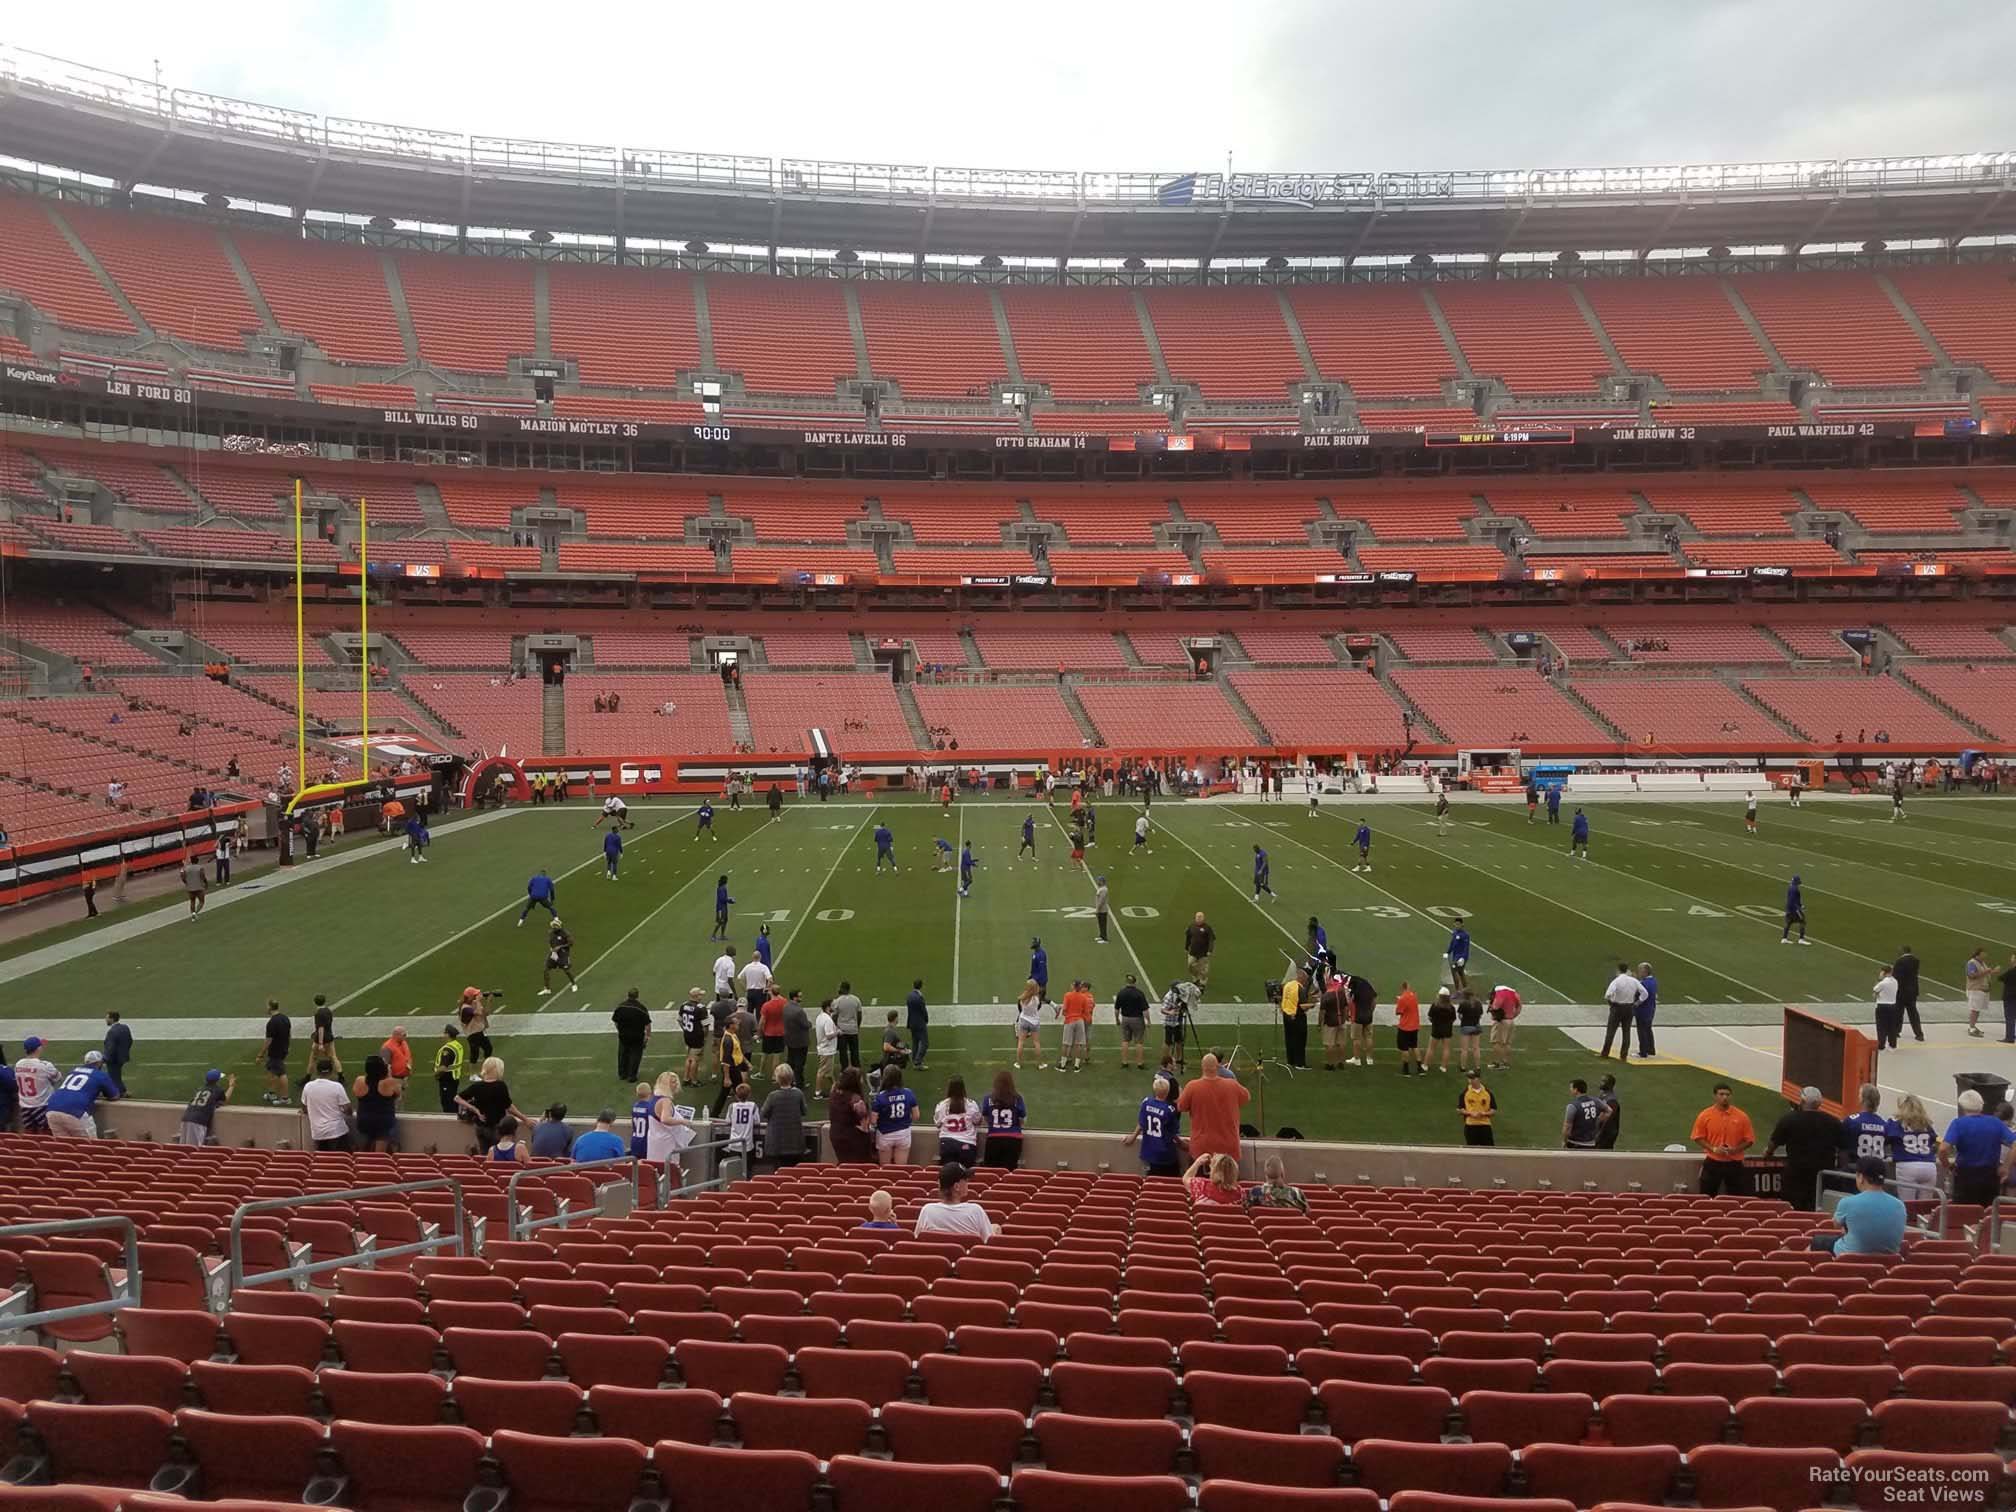 section 106, row 22 seat view  - cleveland browns stadium